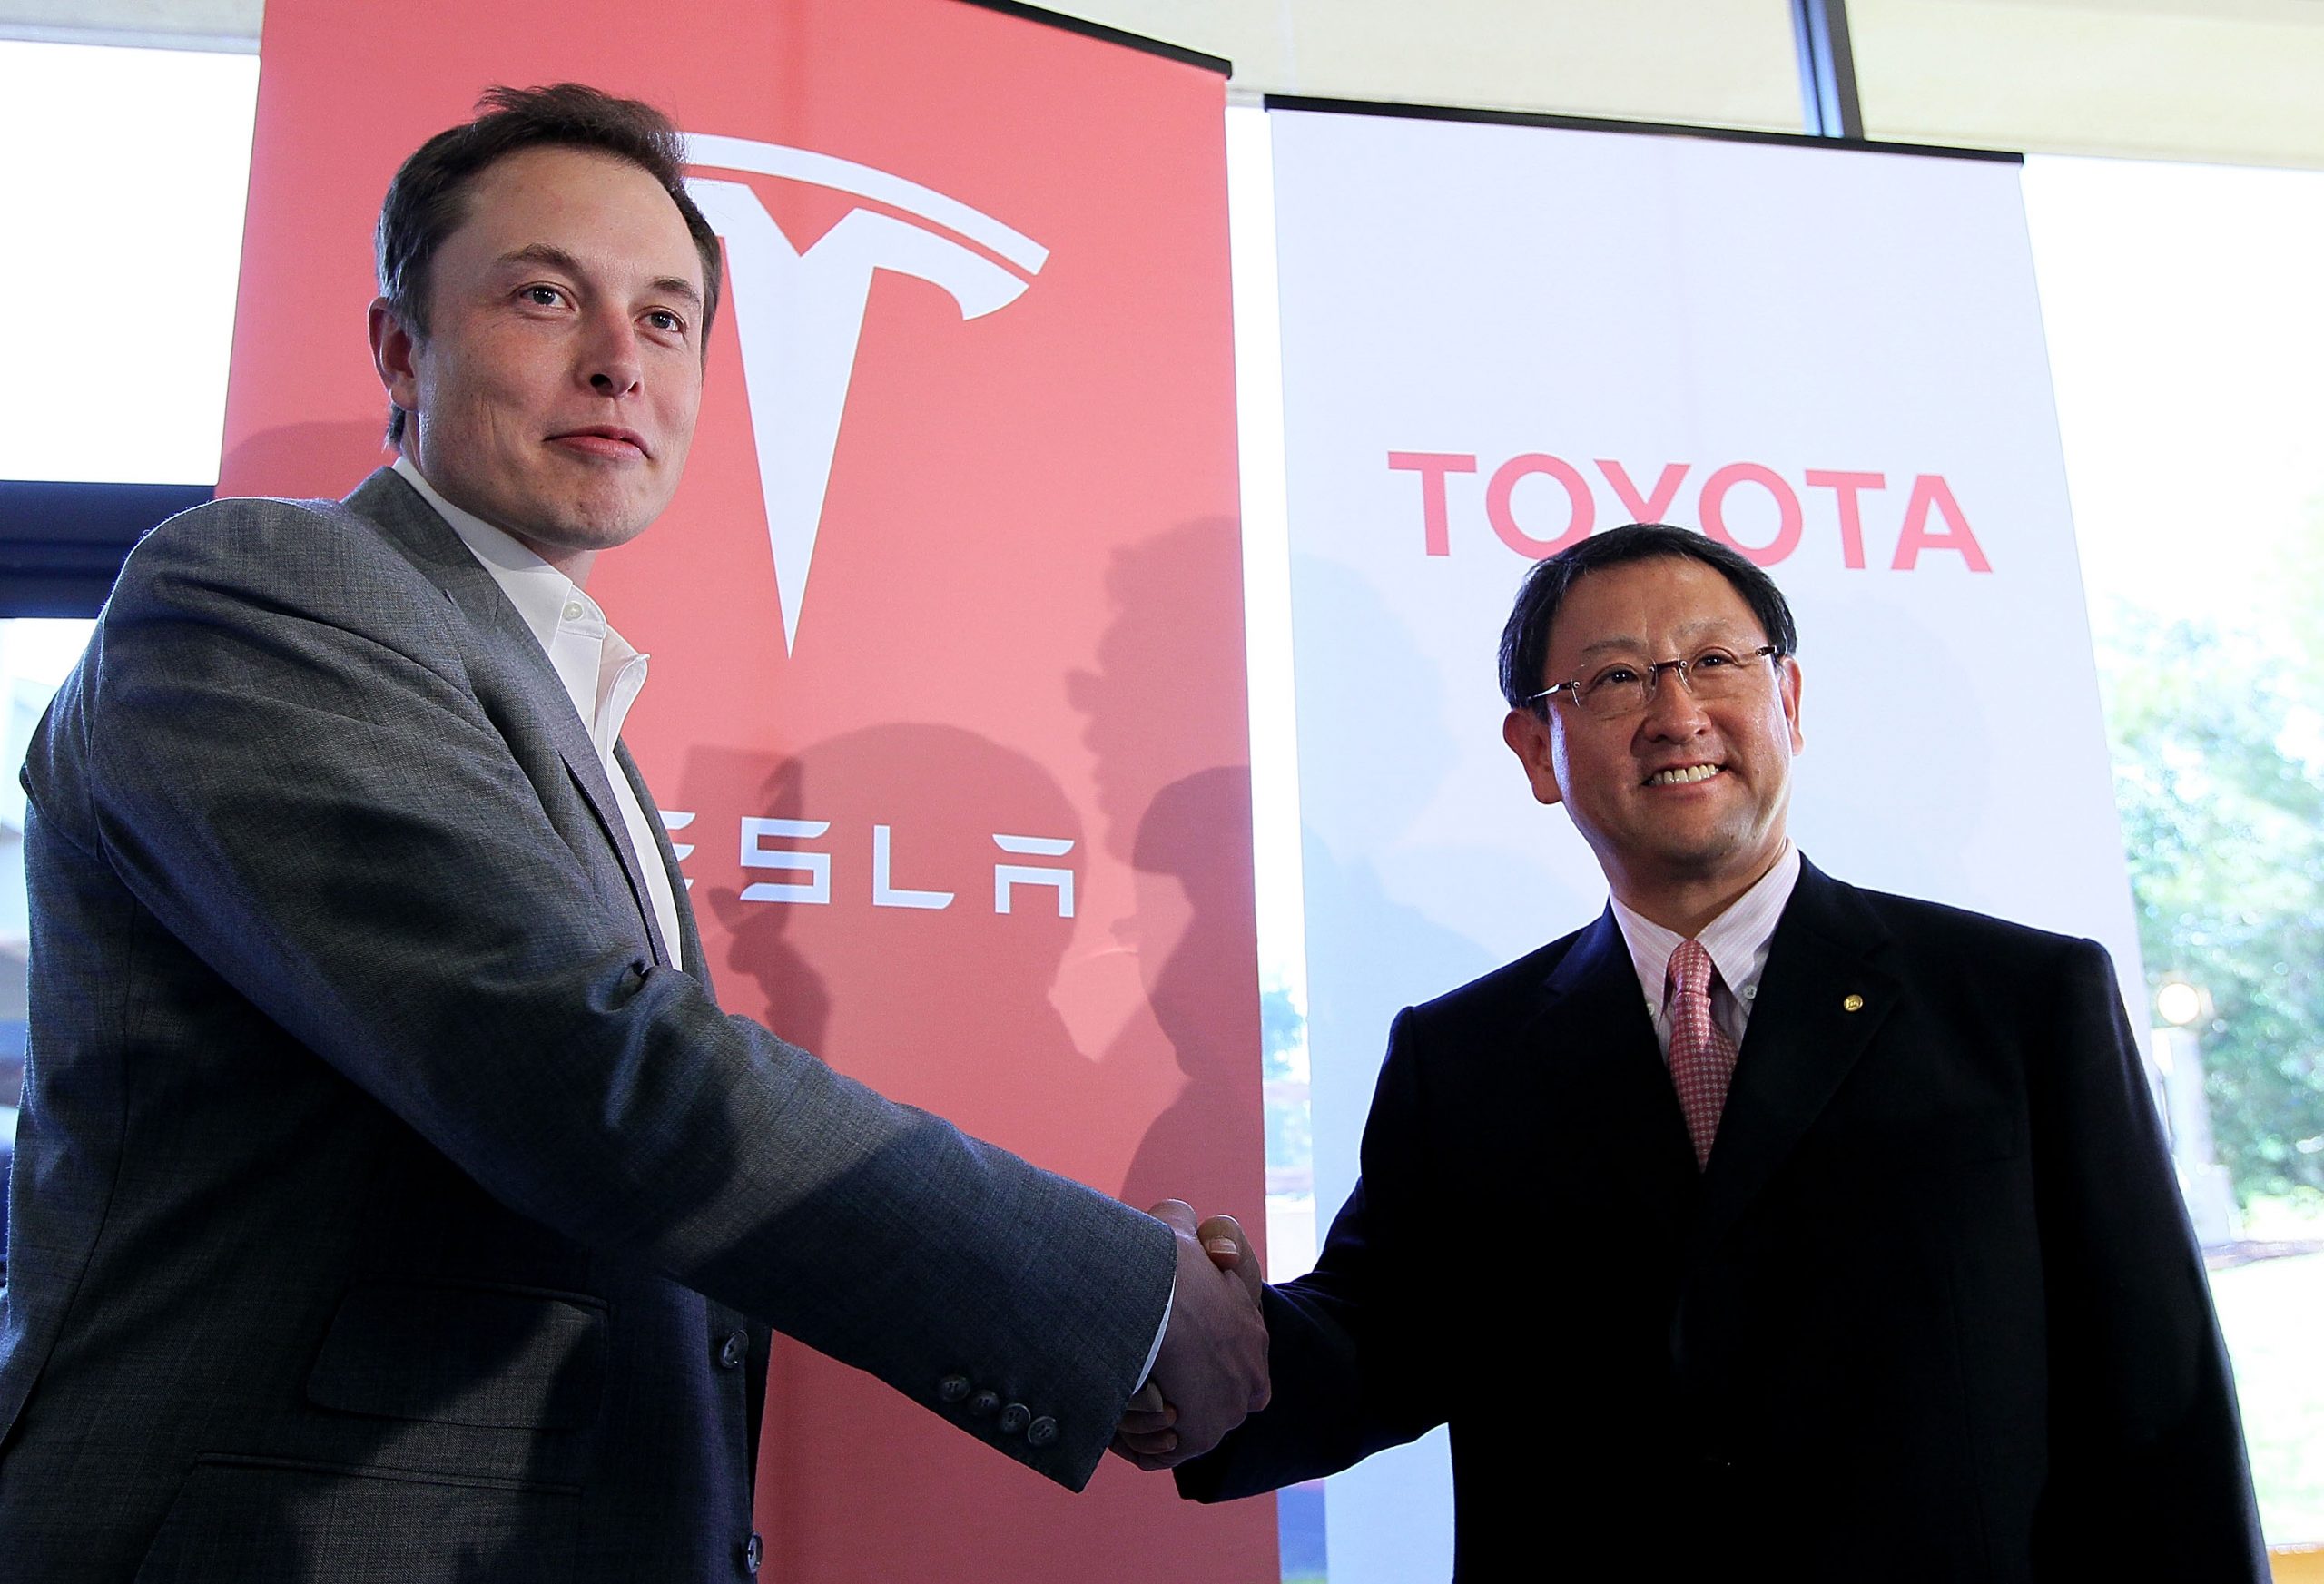 The CEOs of Tesla and Toyota shaking hands